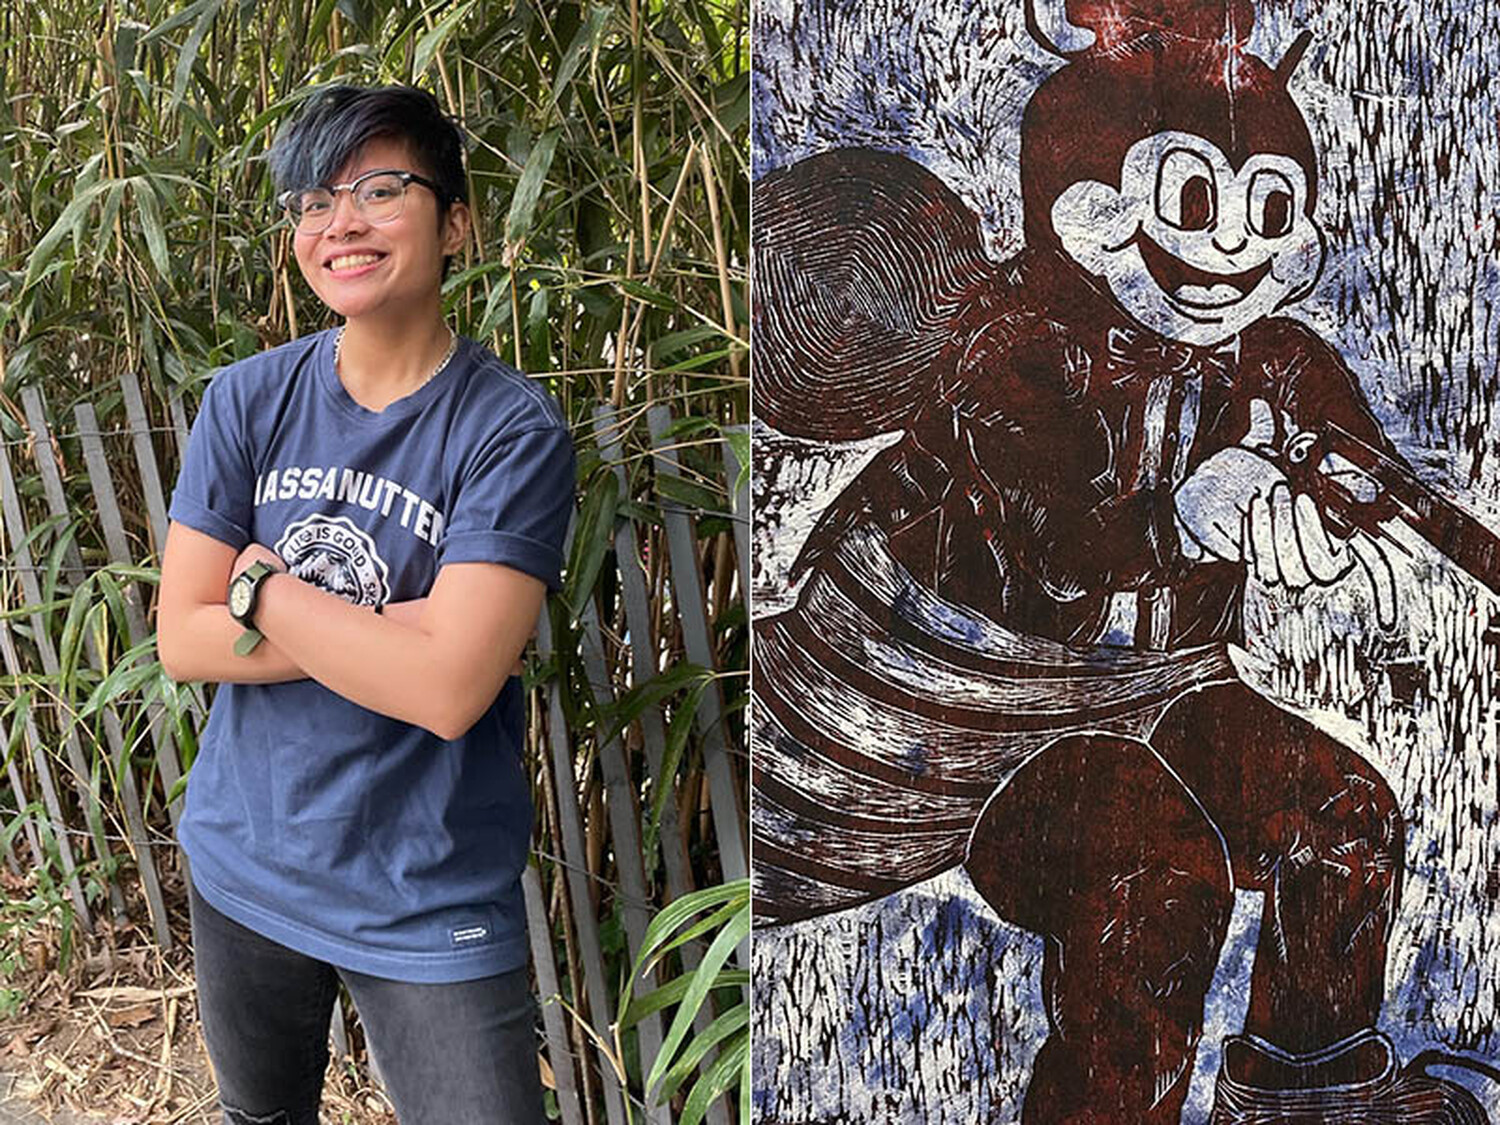 Printmaker Mira Manalastas&apos; work explores the continuing effects of the United States&apos; influence on the Phillipines.  Manalastas subverts the fast-food icon Jollibee to examine the reality behind the cultural facade.